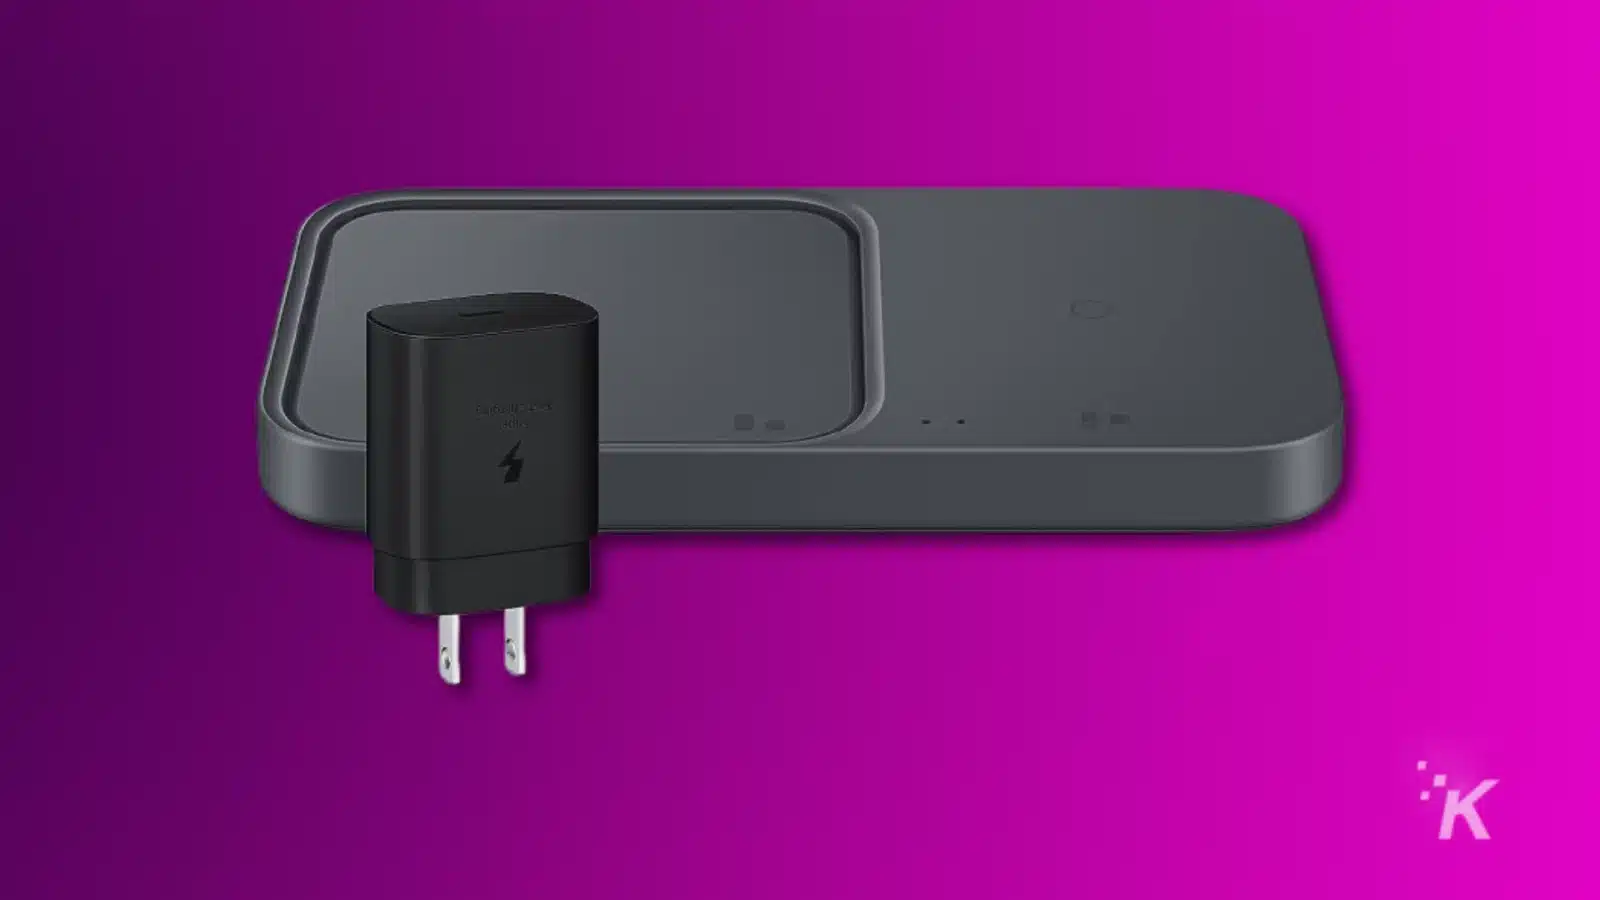 Samsung charger duo on a purple background